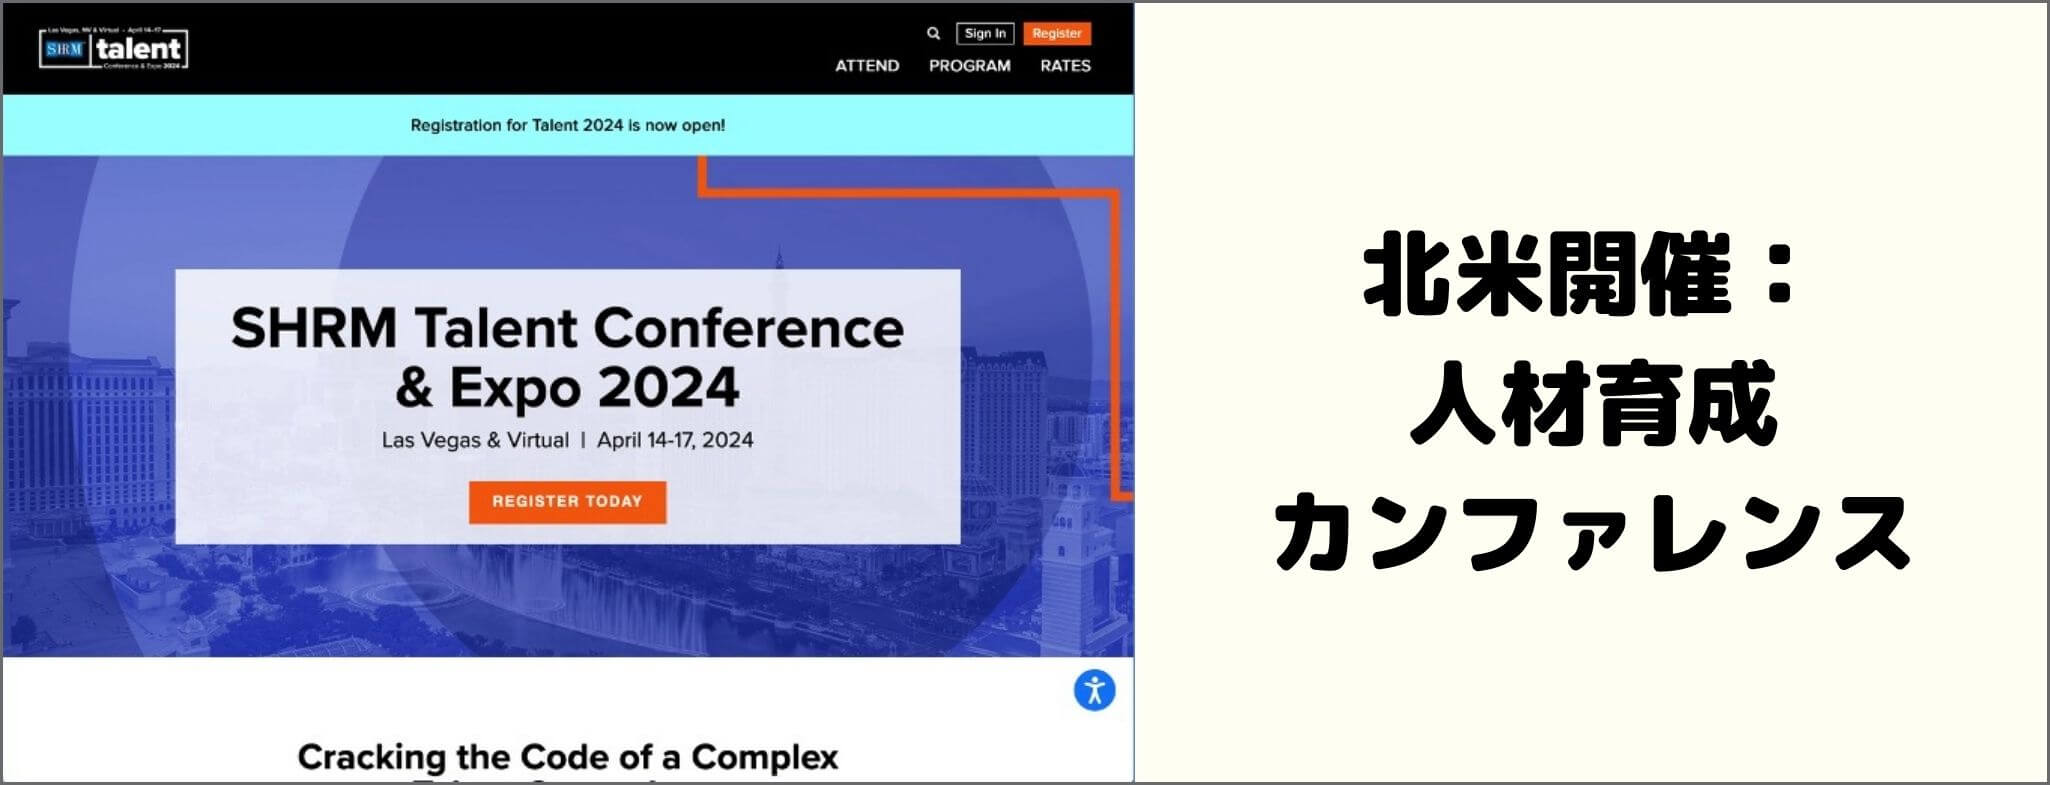 SHRM Talent Conference & Expo 2024 イベントグローブ